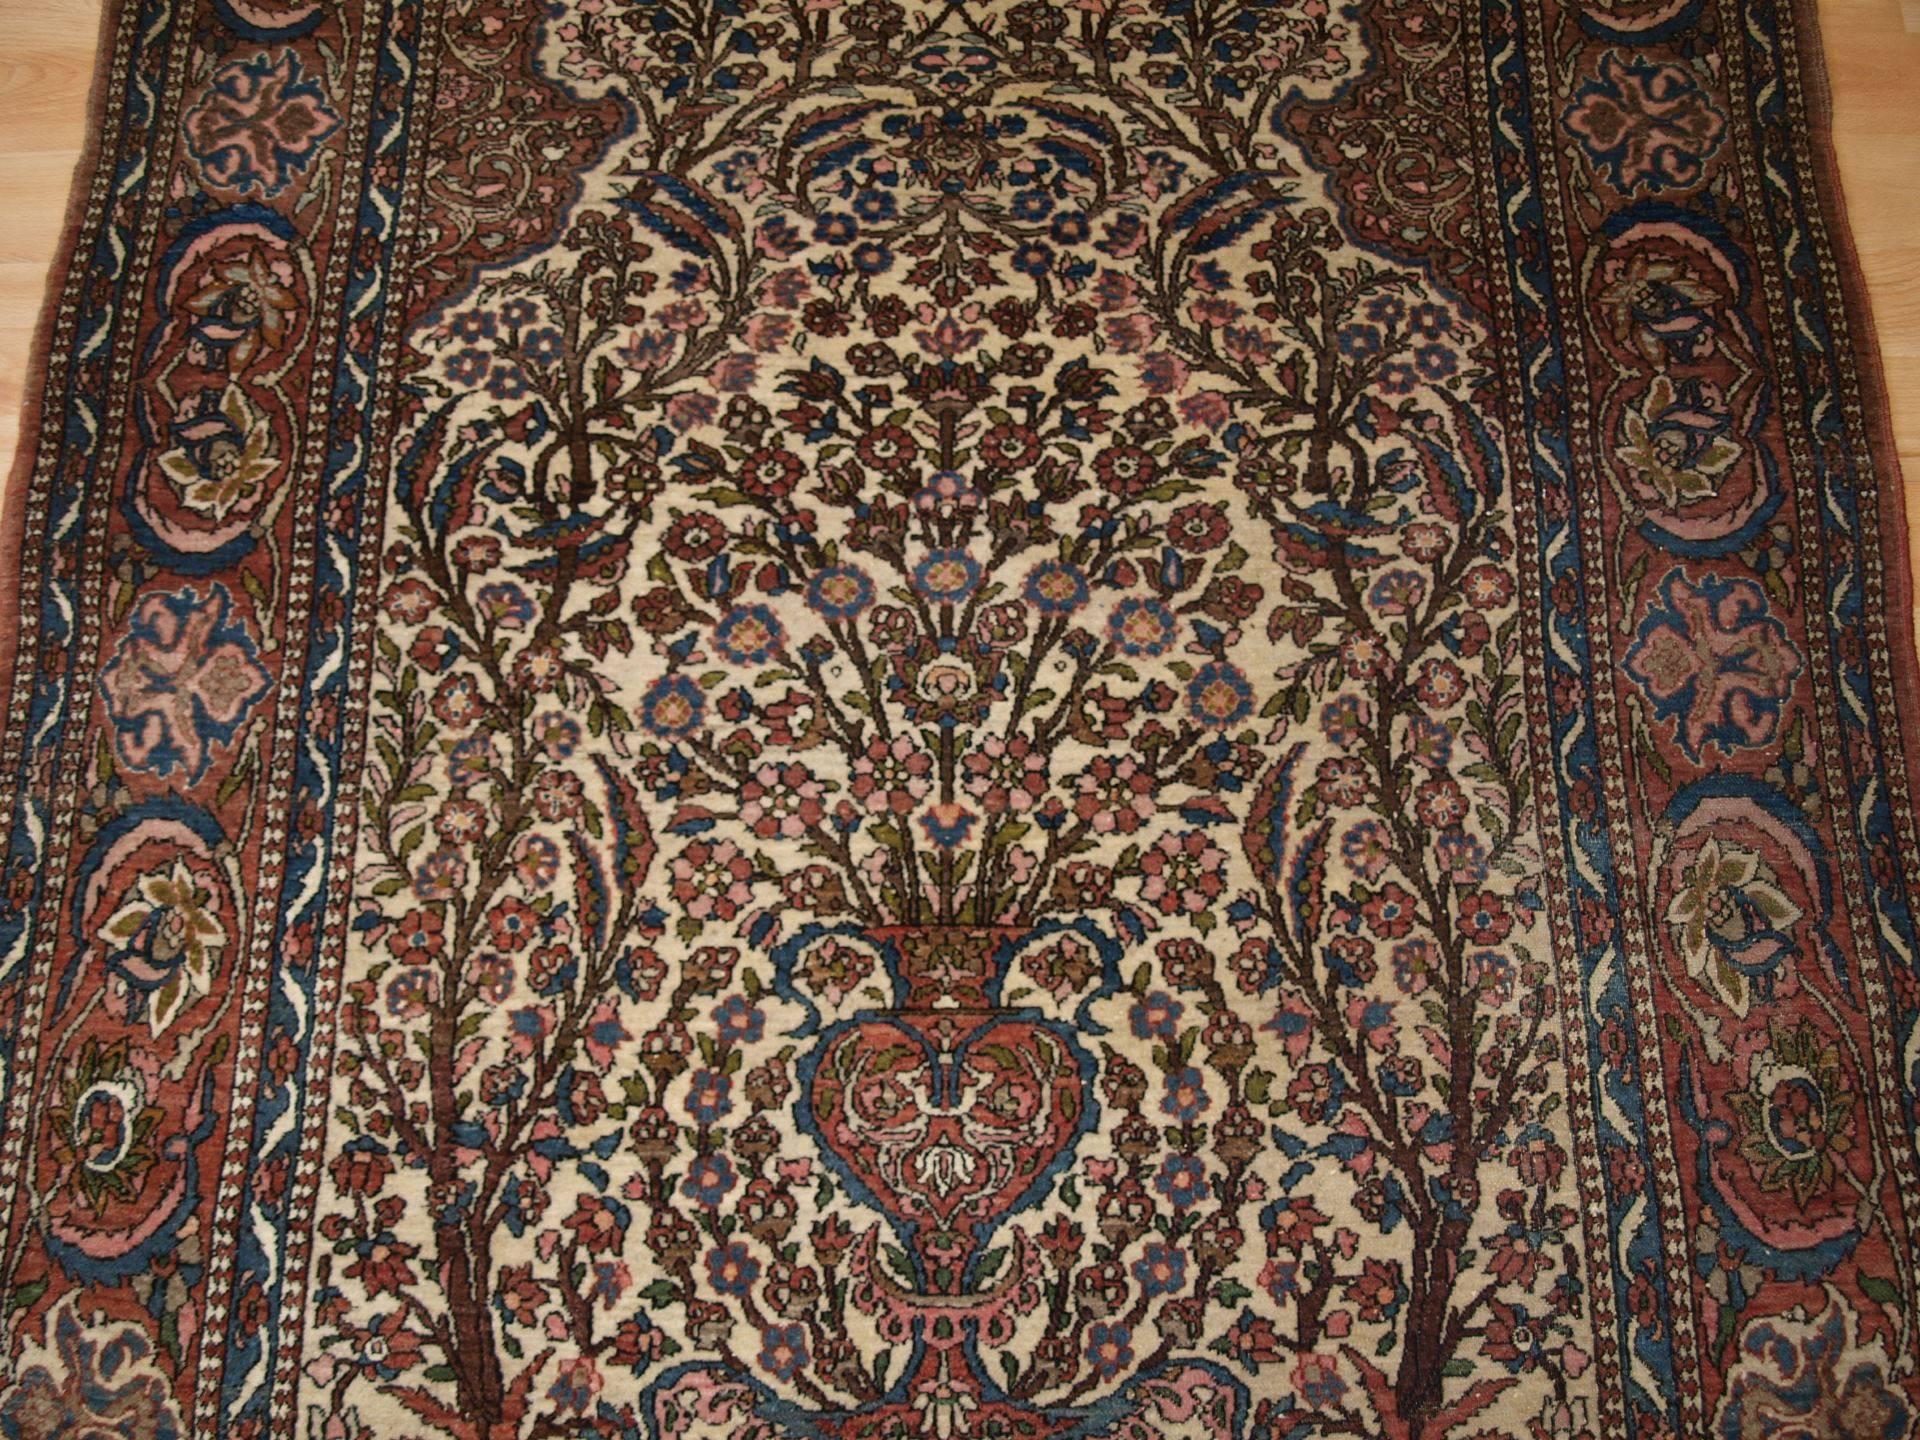 Isfahan Prayer Rug with a Very Traditional Floral Vase Design, circa 1900 For Sale 2